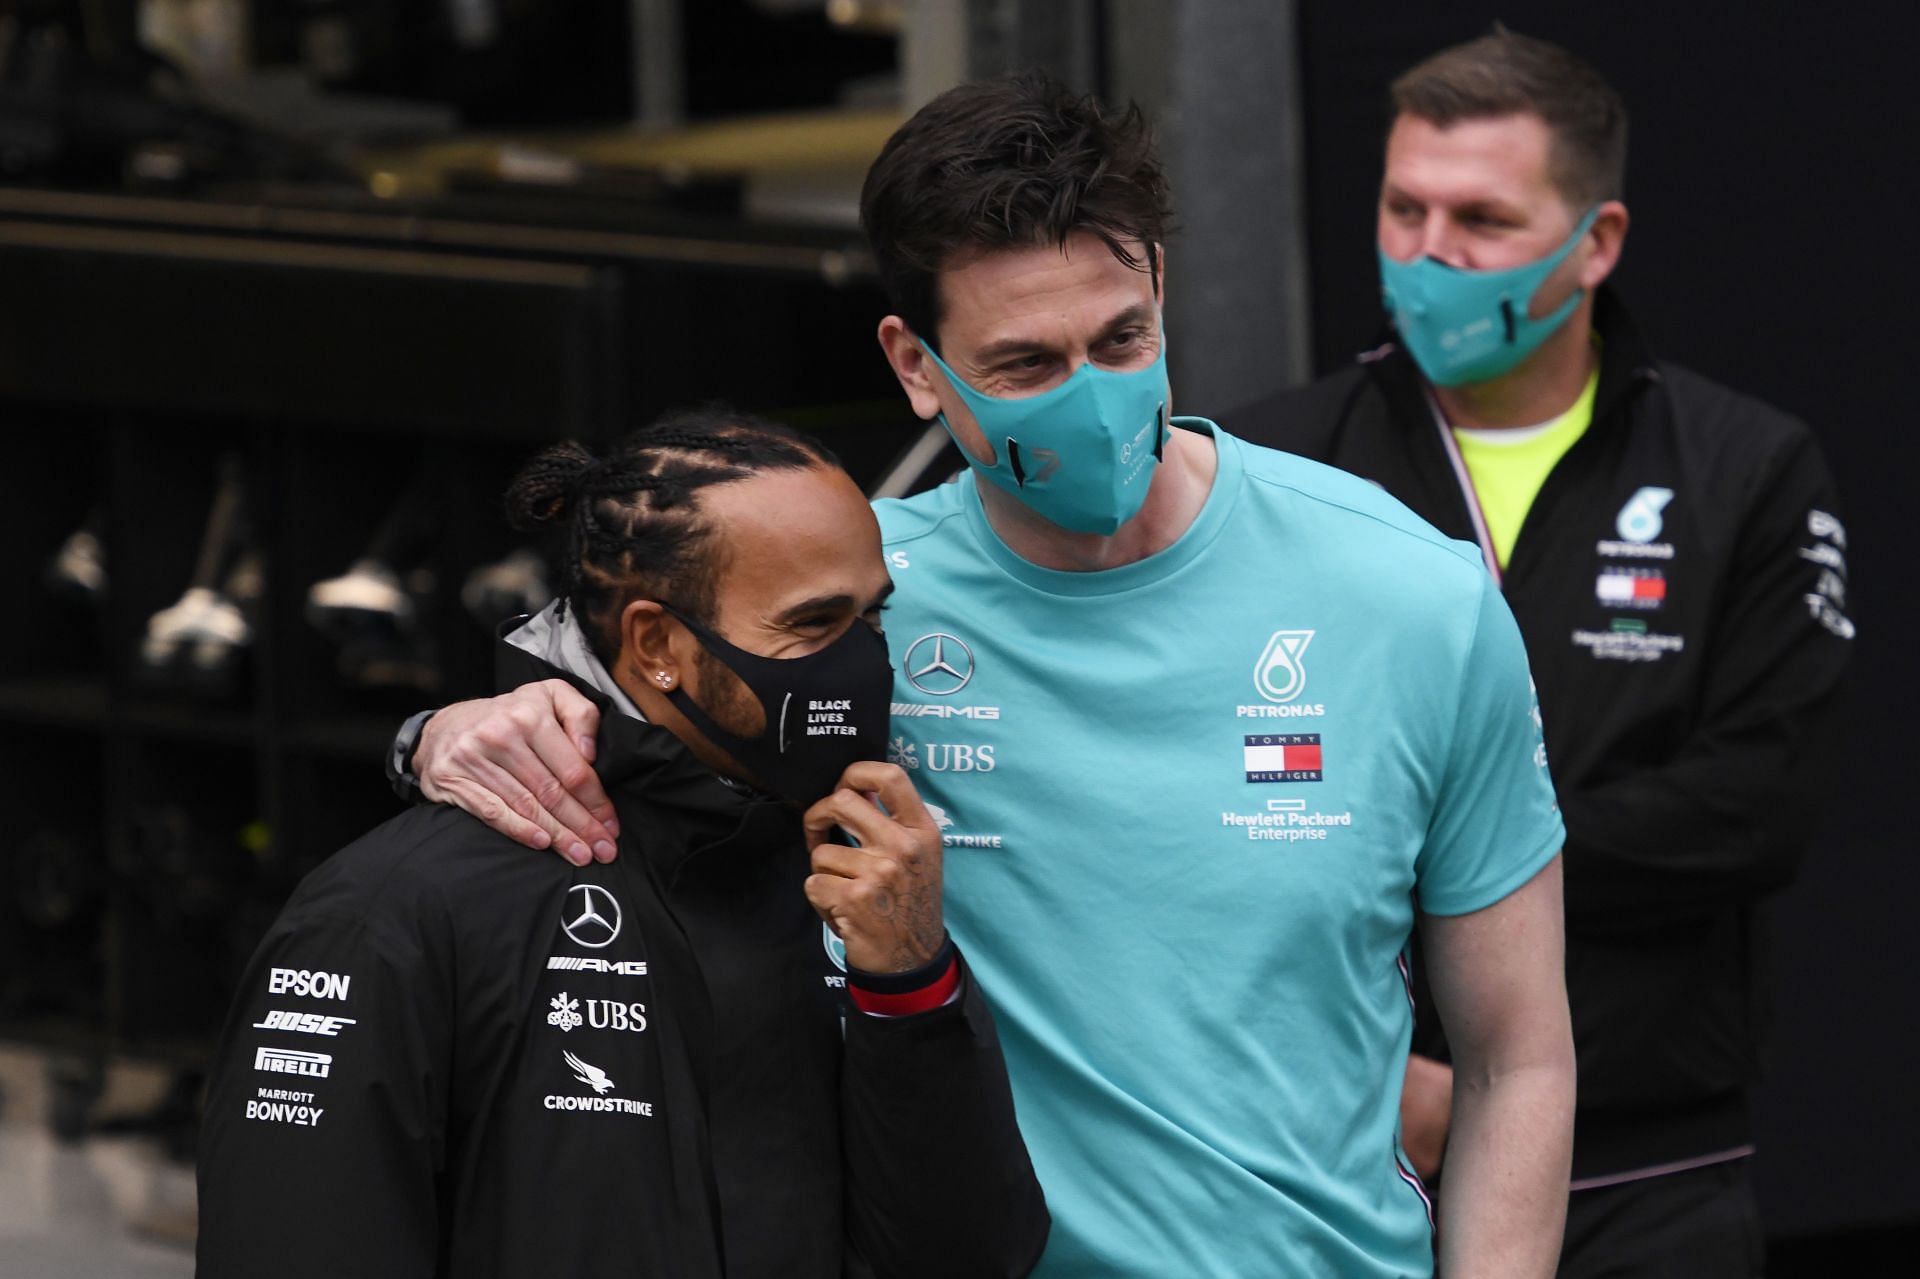 Mercedes chief Wolff hopes he sees the 7-time champion back at the grid for the 2022 season